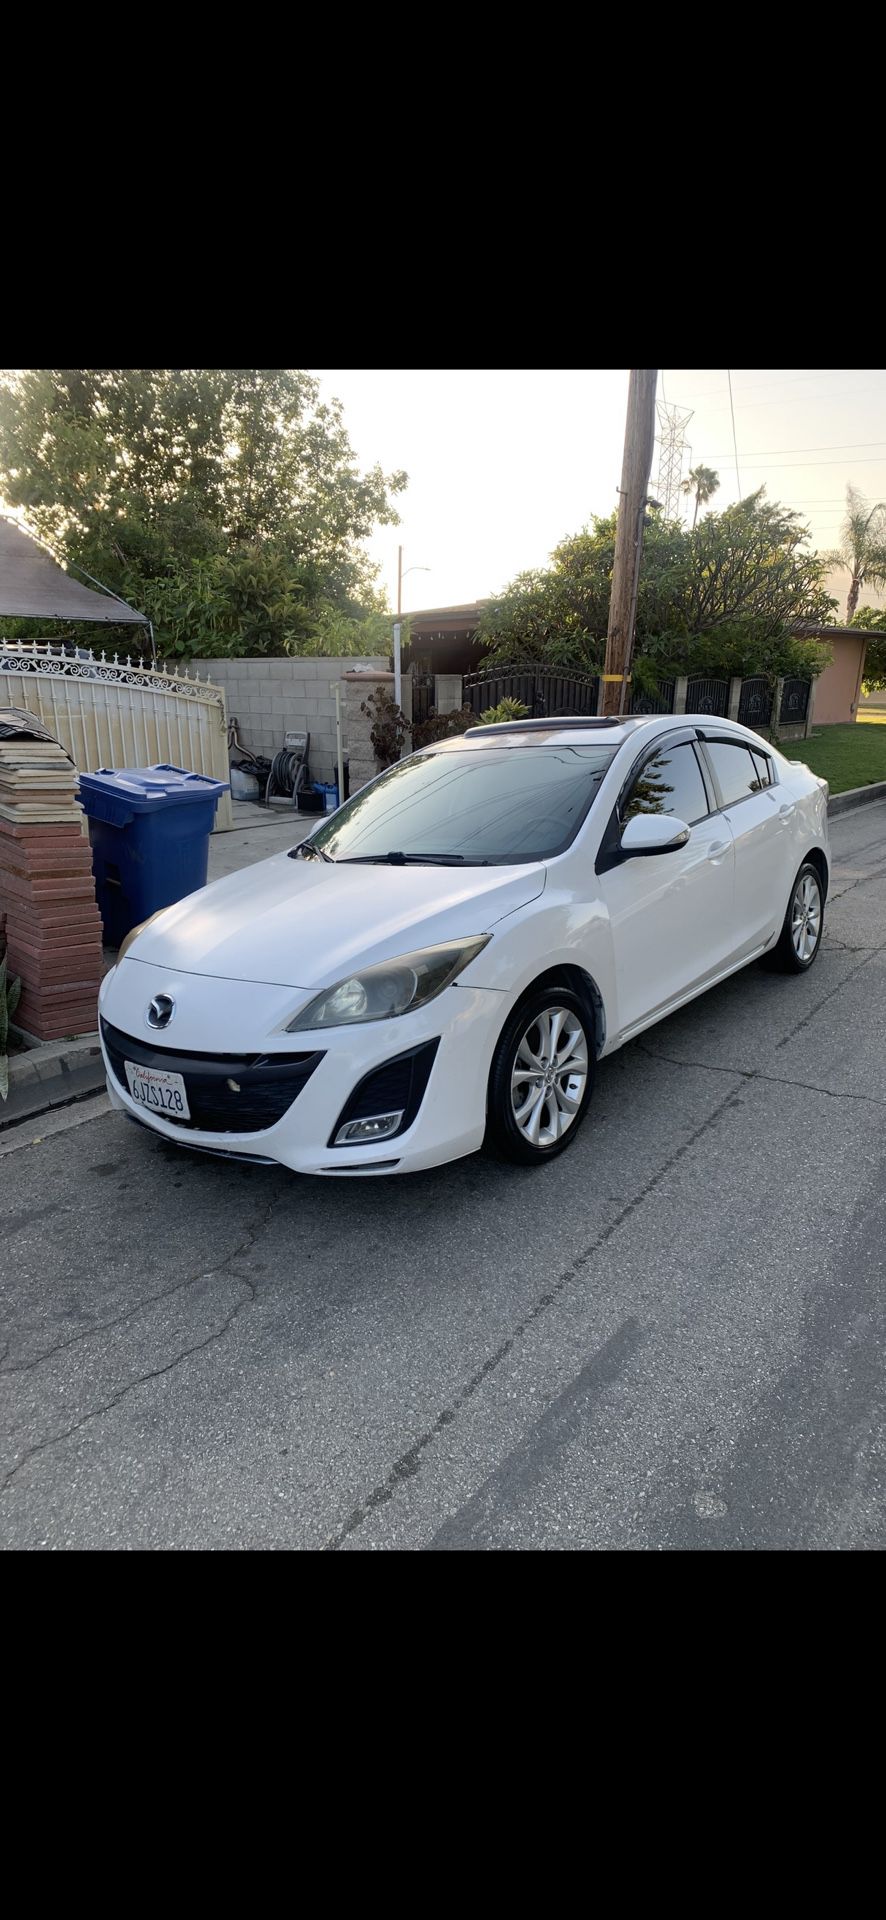 2010 Mazda 3 Part out